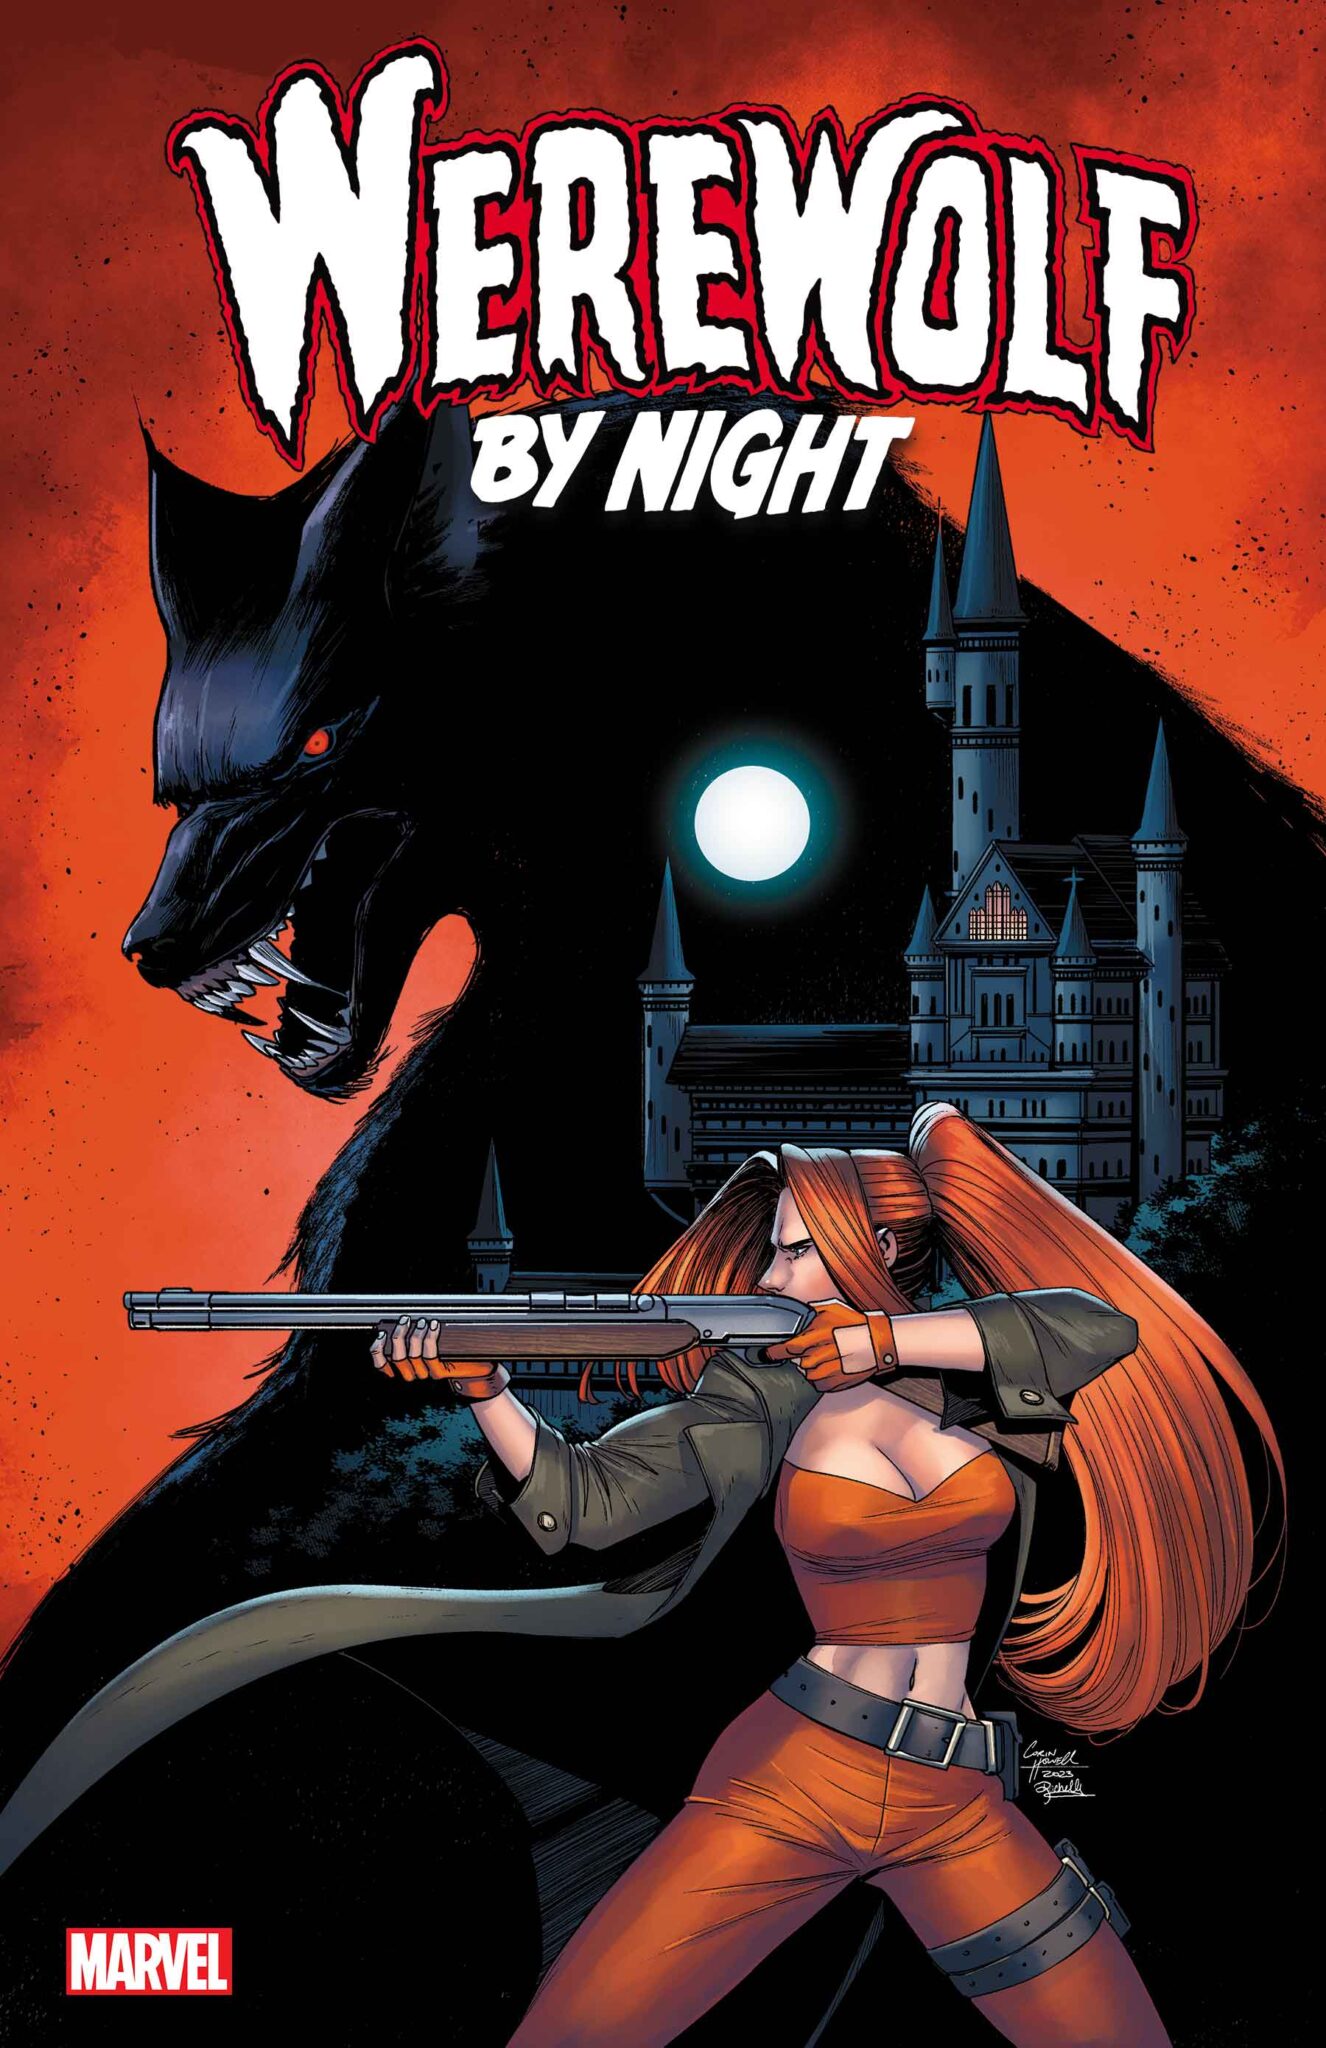 Werewolf By Night #1 cover